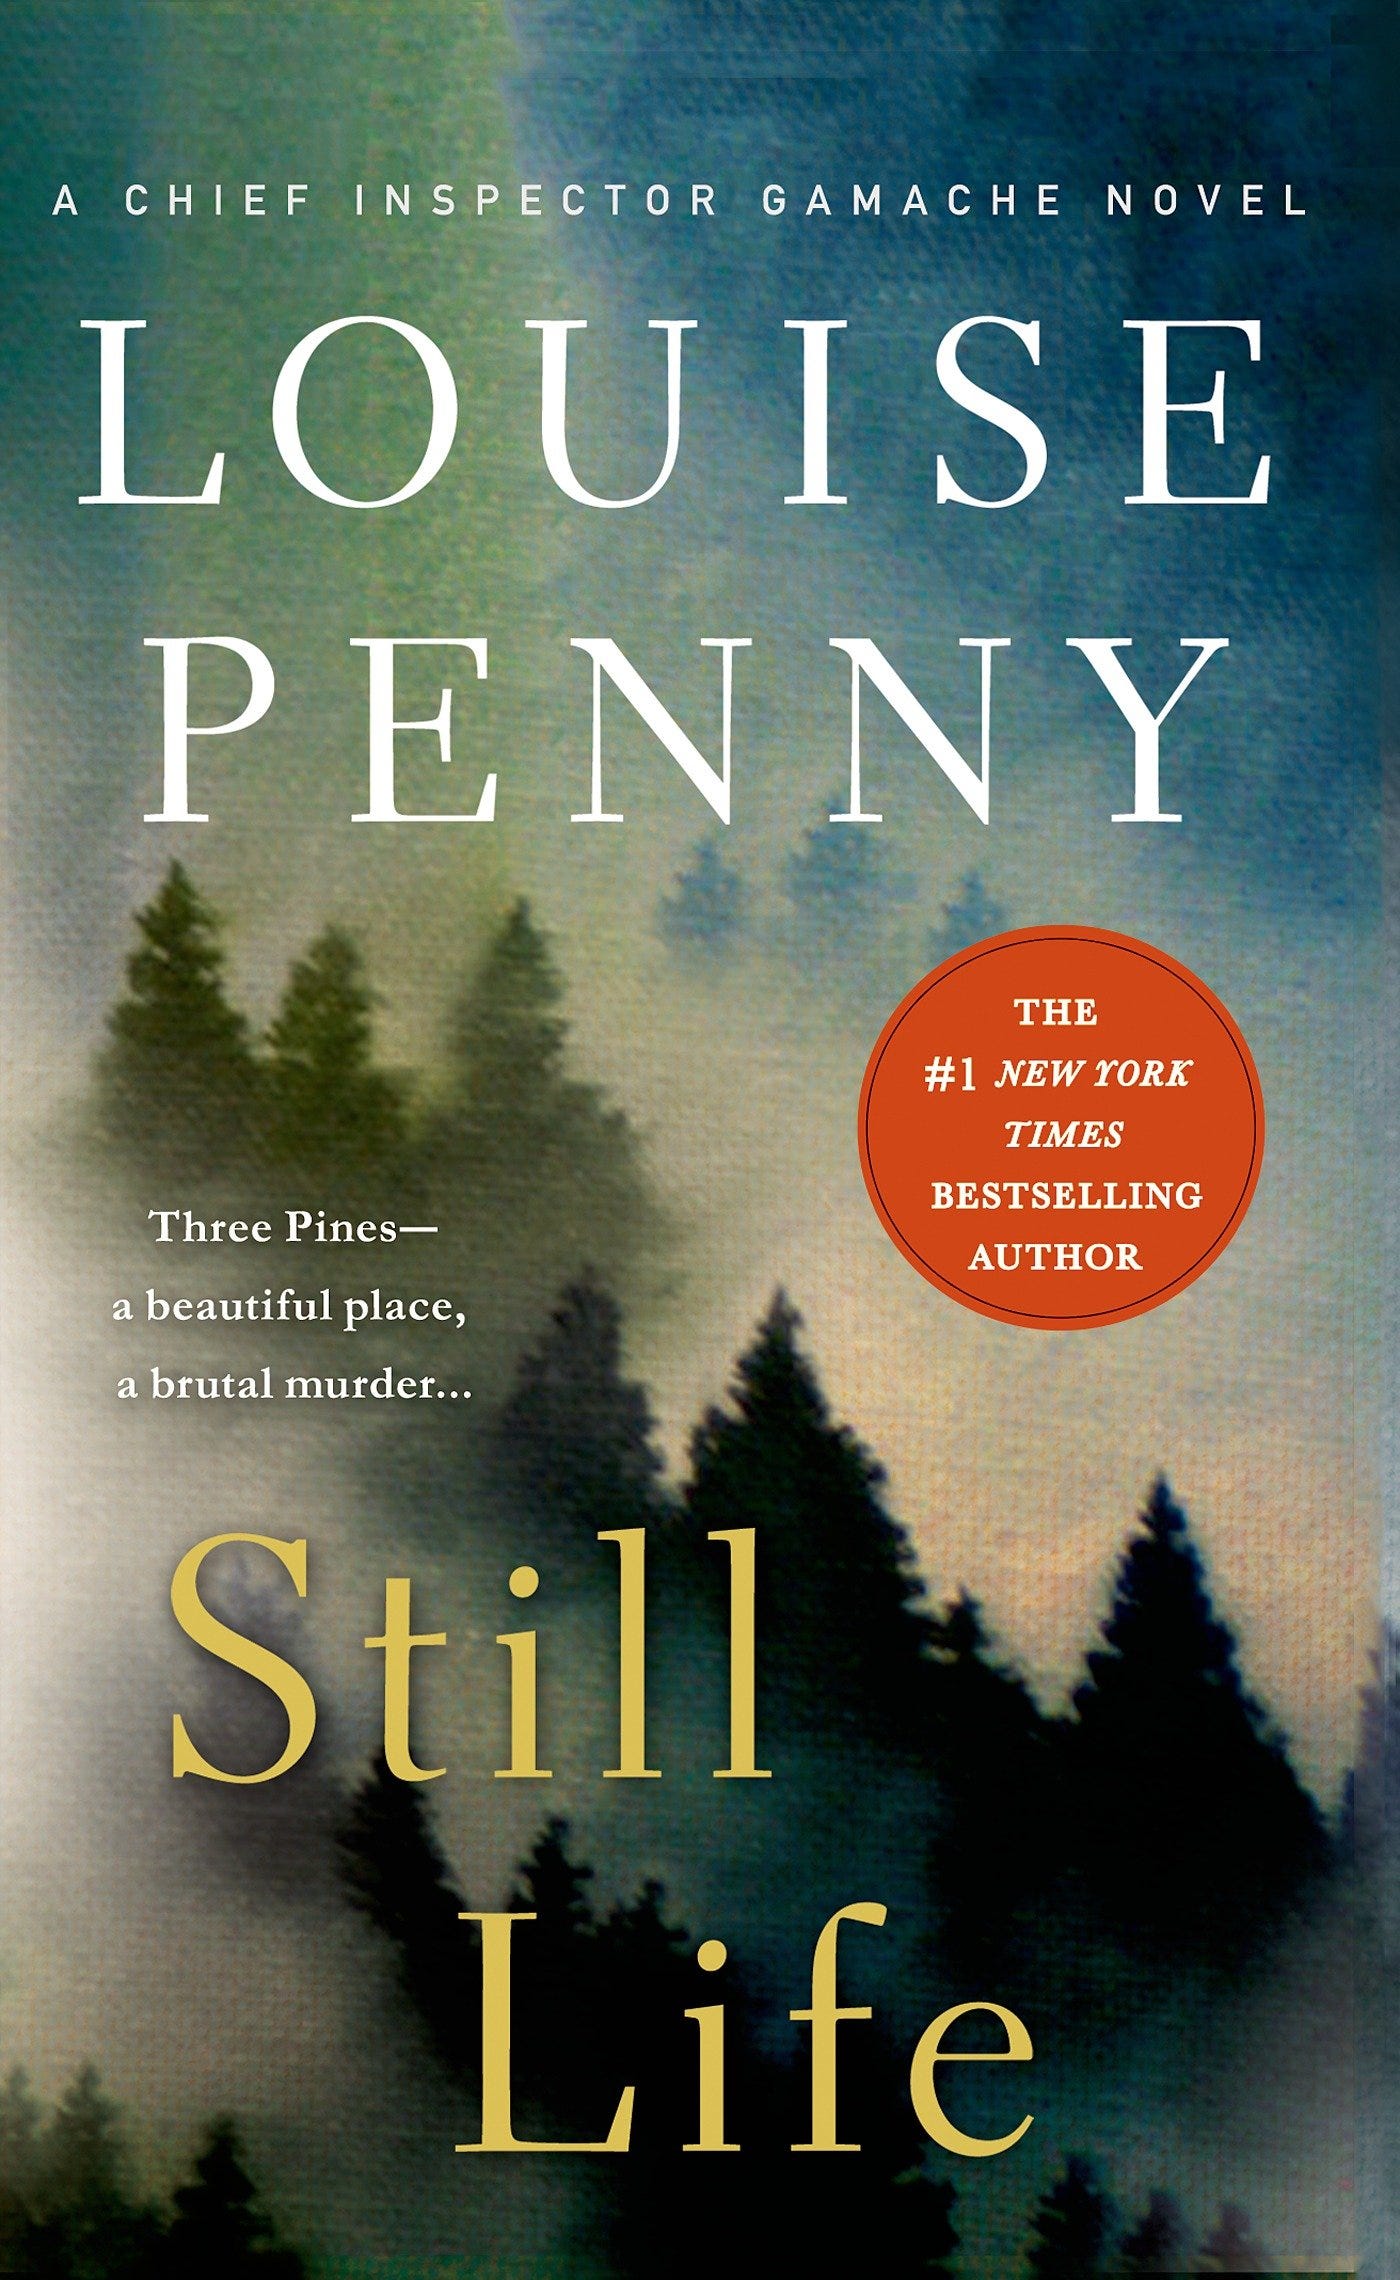 Louise Penny: The Three Pines series in order